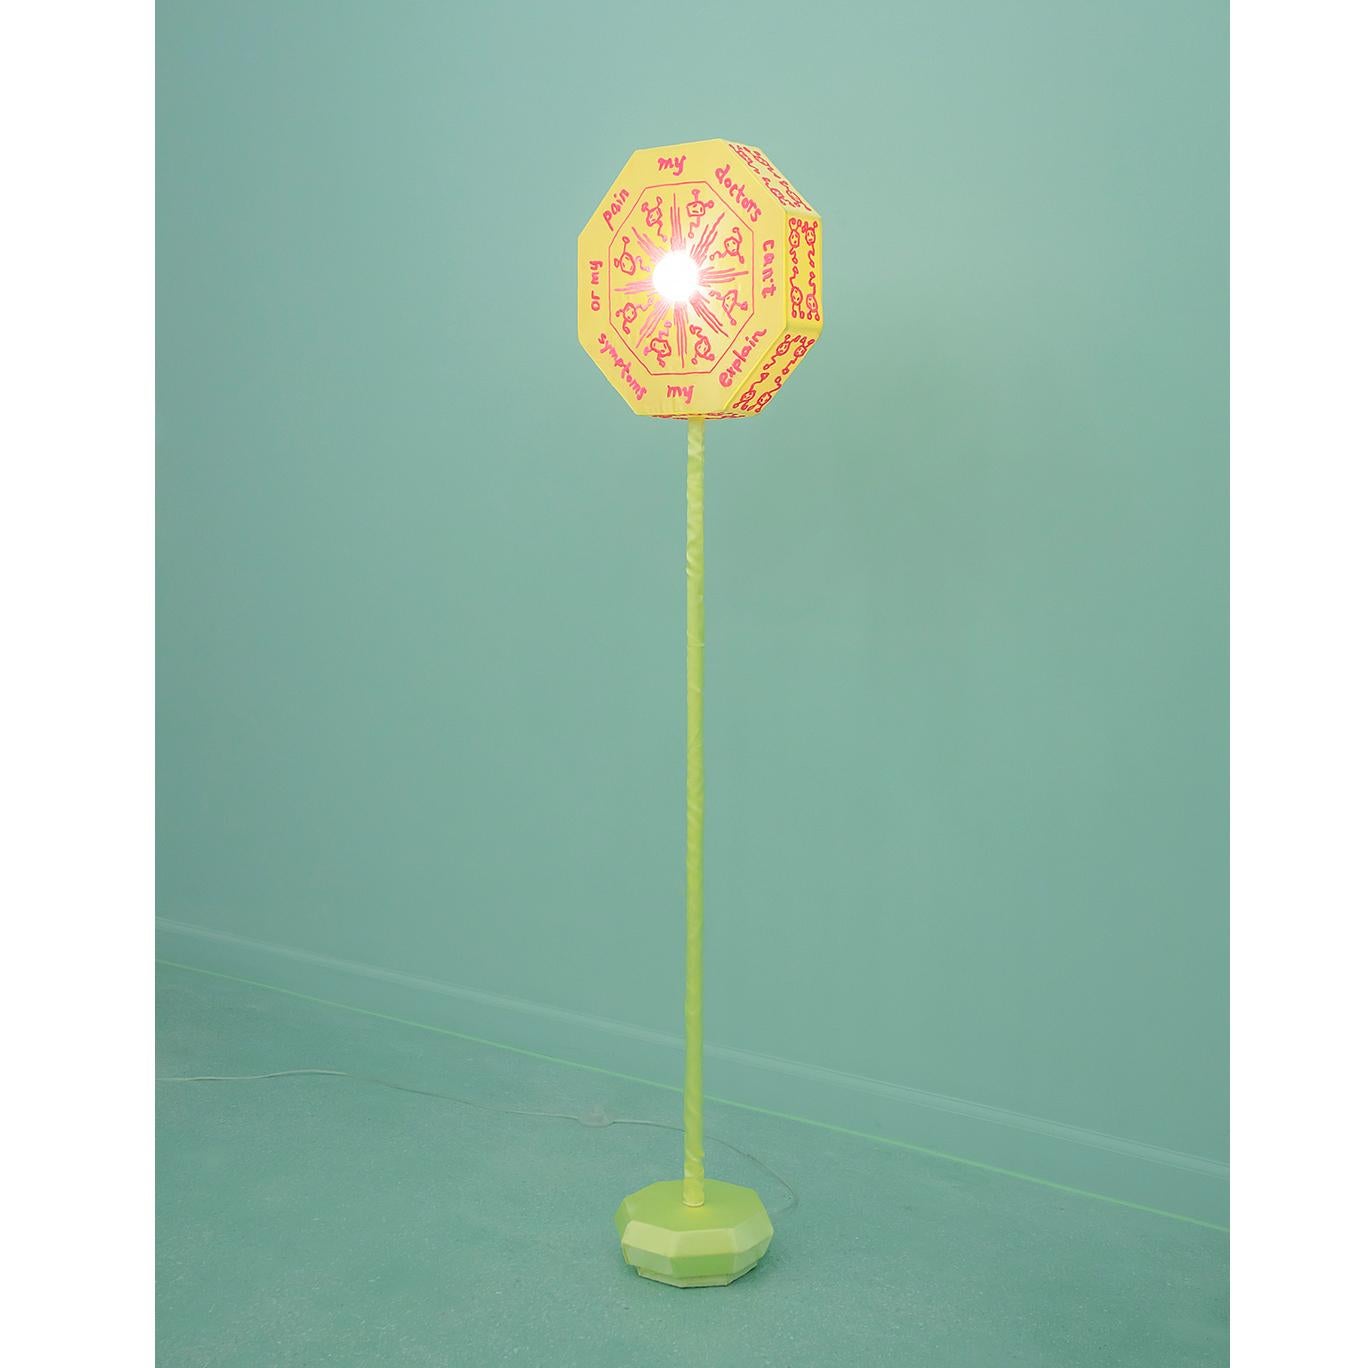 “Dopamine” floor lamp is inspired by the artistic form of classical Chinese ceremonial objects such as Taoist furniture and diagrams. It is covered in fine silk, hand-embroidered with the molecular geometry of dopamine – the neurotransmitter that